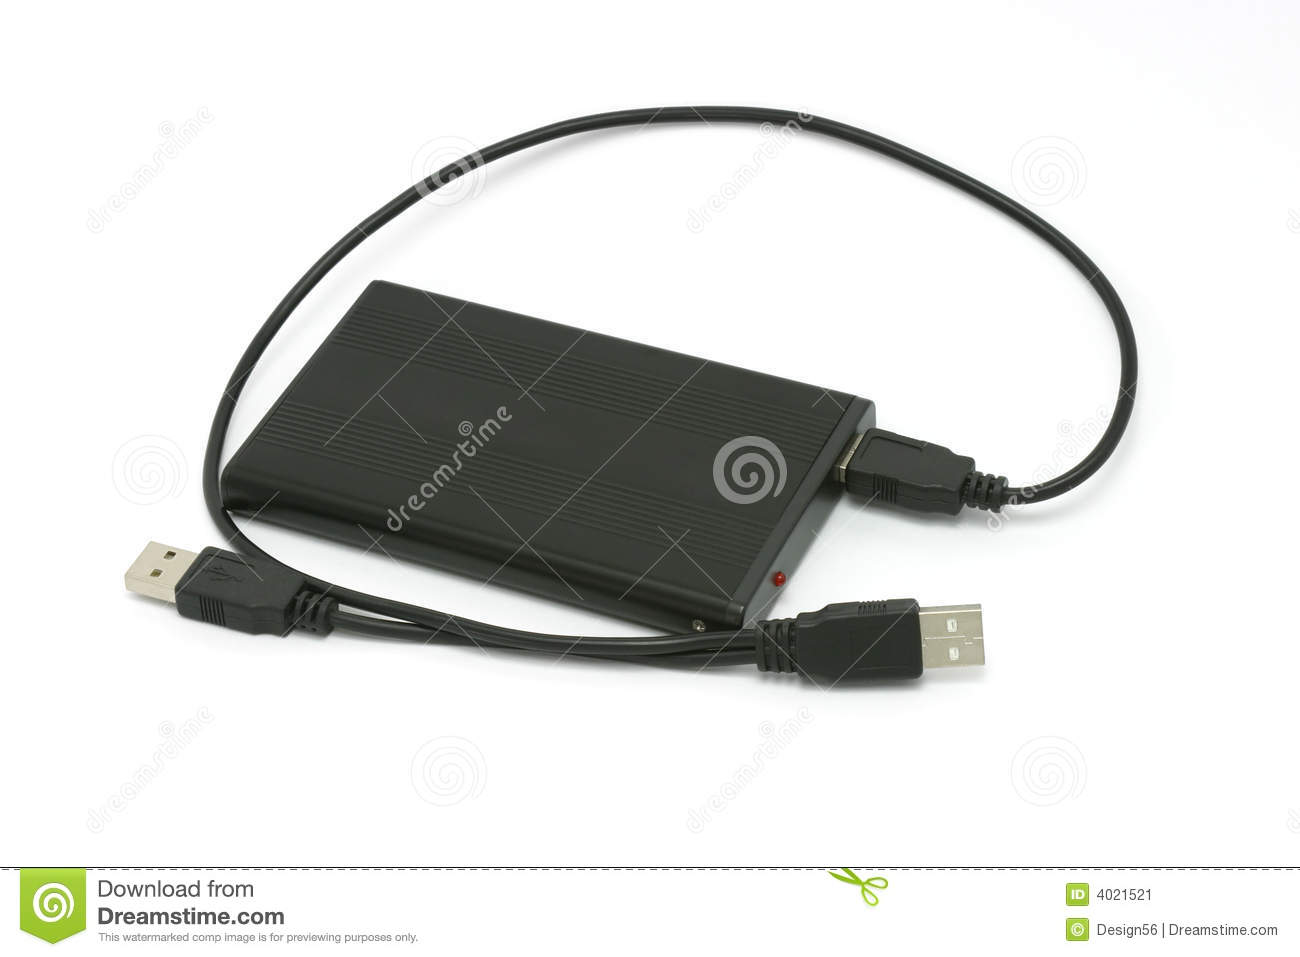 Portable External Hdd Hard Disk Drive Stock Image   Image  4021521